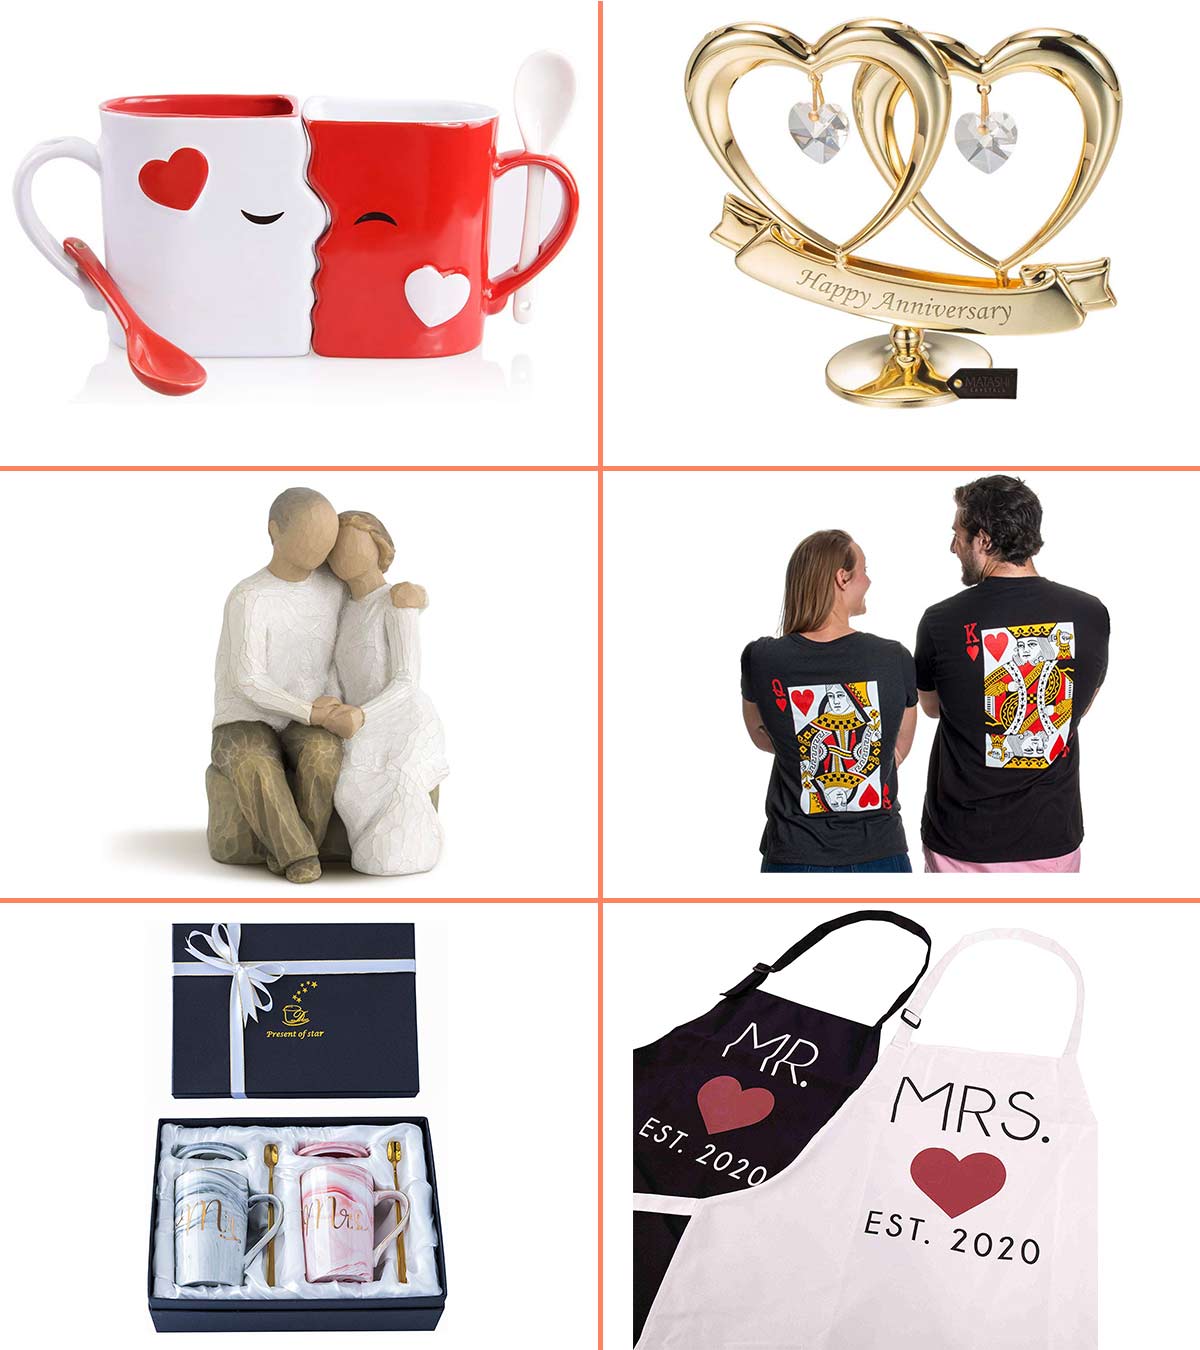 23 Best Wedding Anniversary Gifts To Buy In 2020